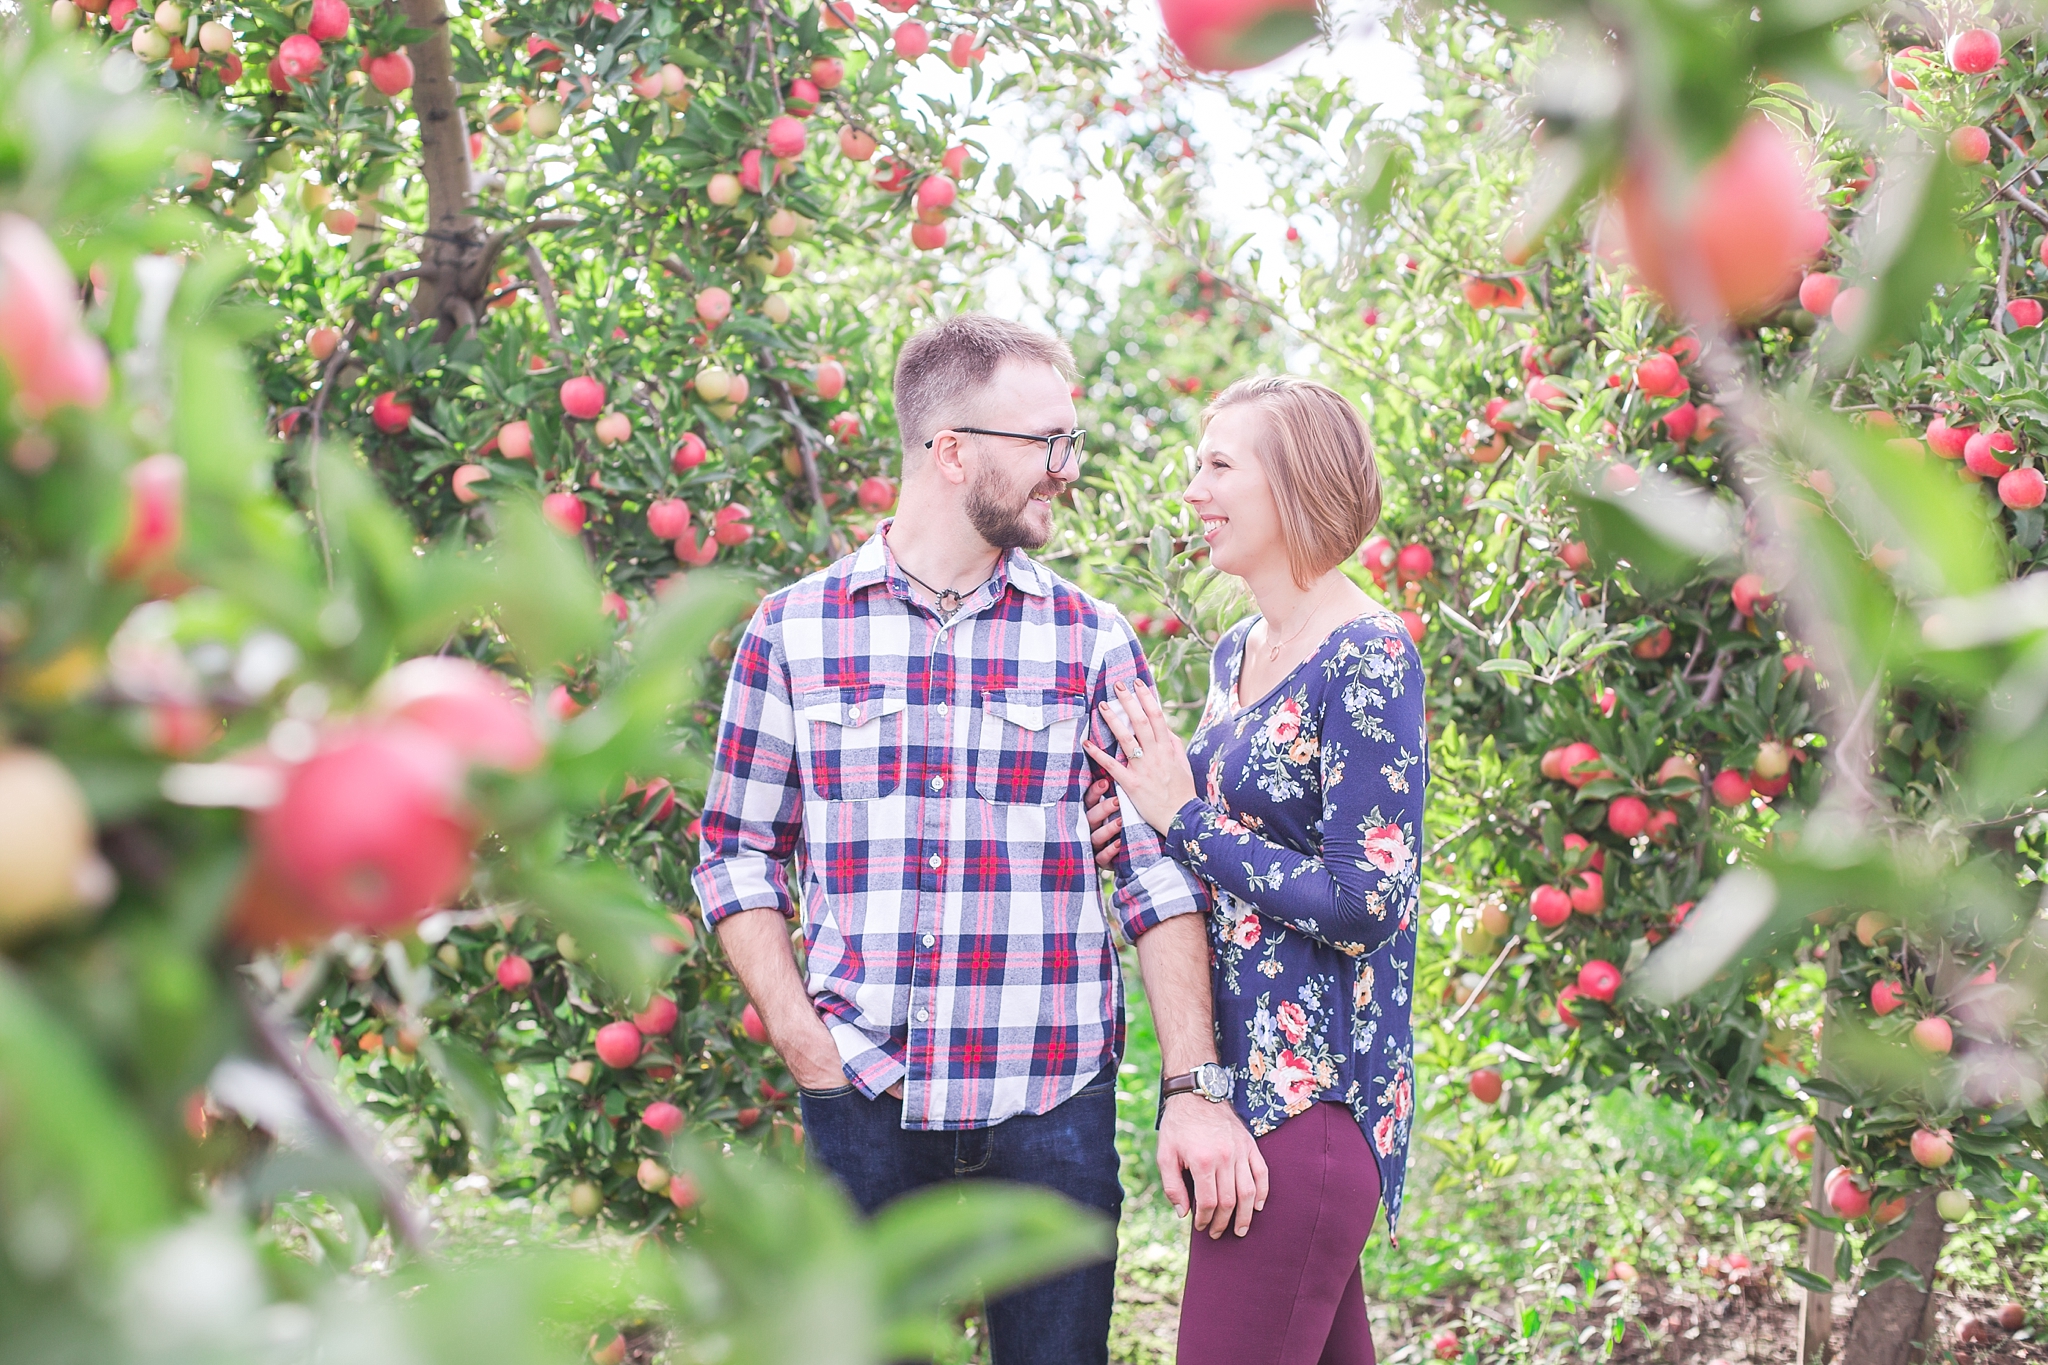 playful-fall-engagement-photos-at-hy's-cider-mill-ochard-in-bruce-township-michigan-by-courtney-carolyn-photography_0022.jpg